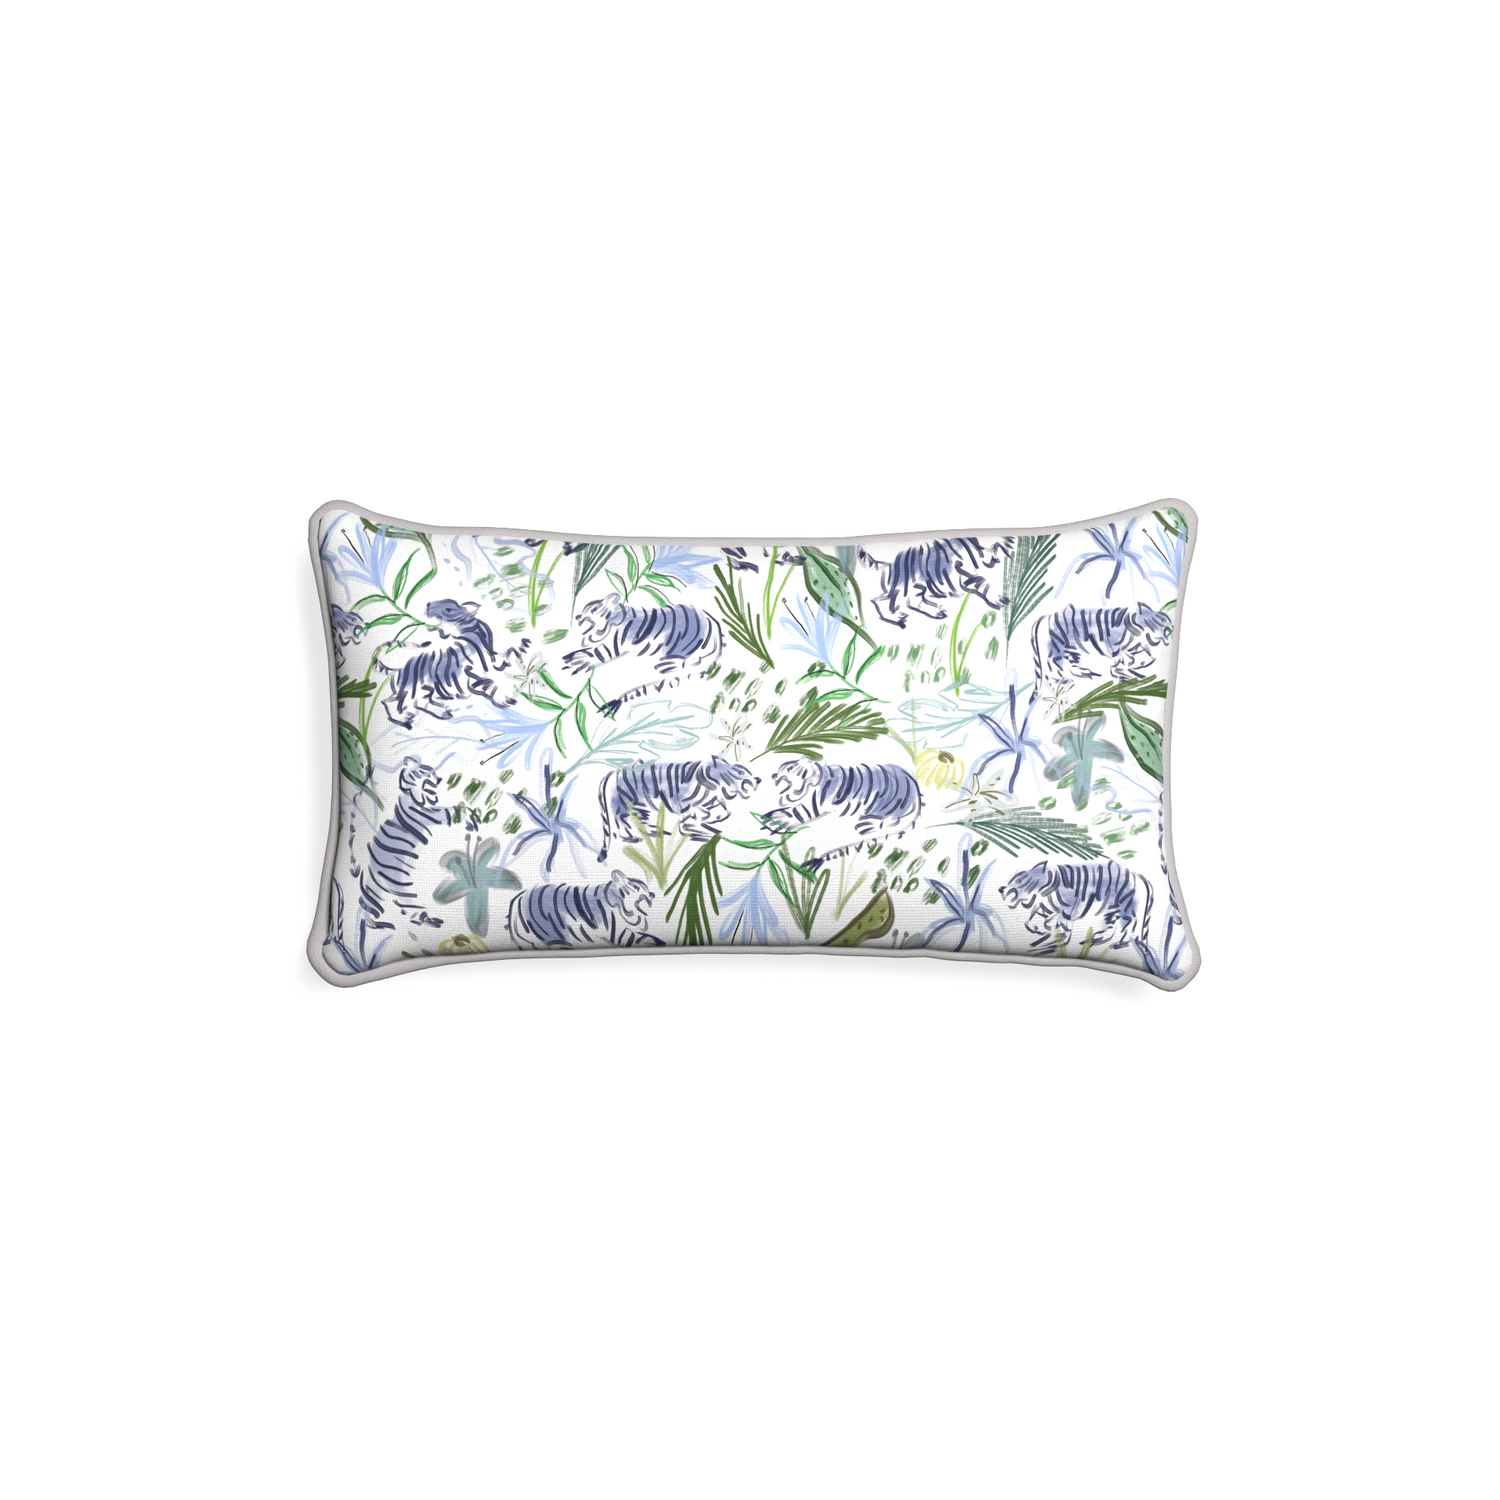 Petite-lumbar frida green custom green tigerpillow with pebble piping on white background